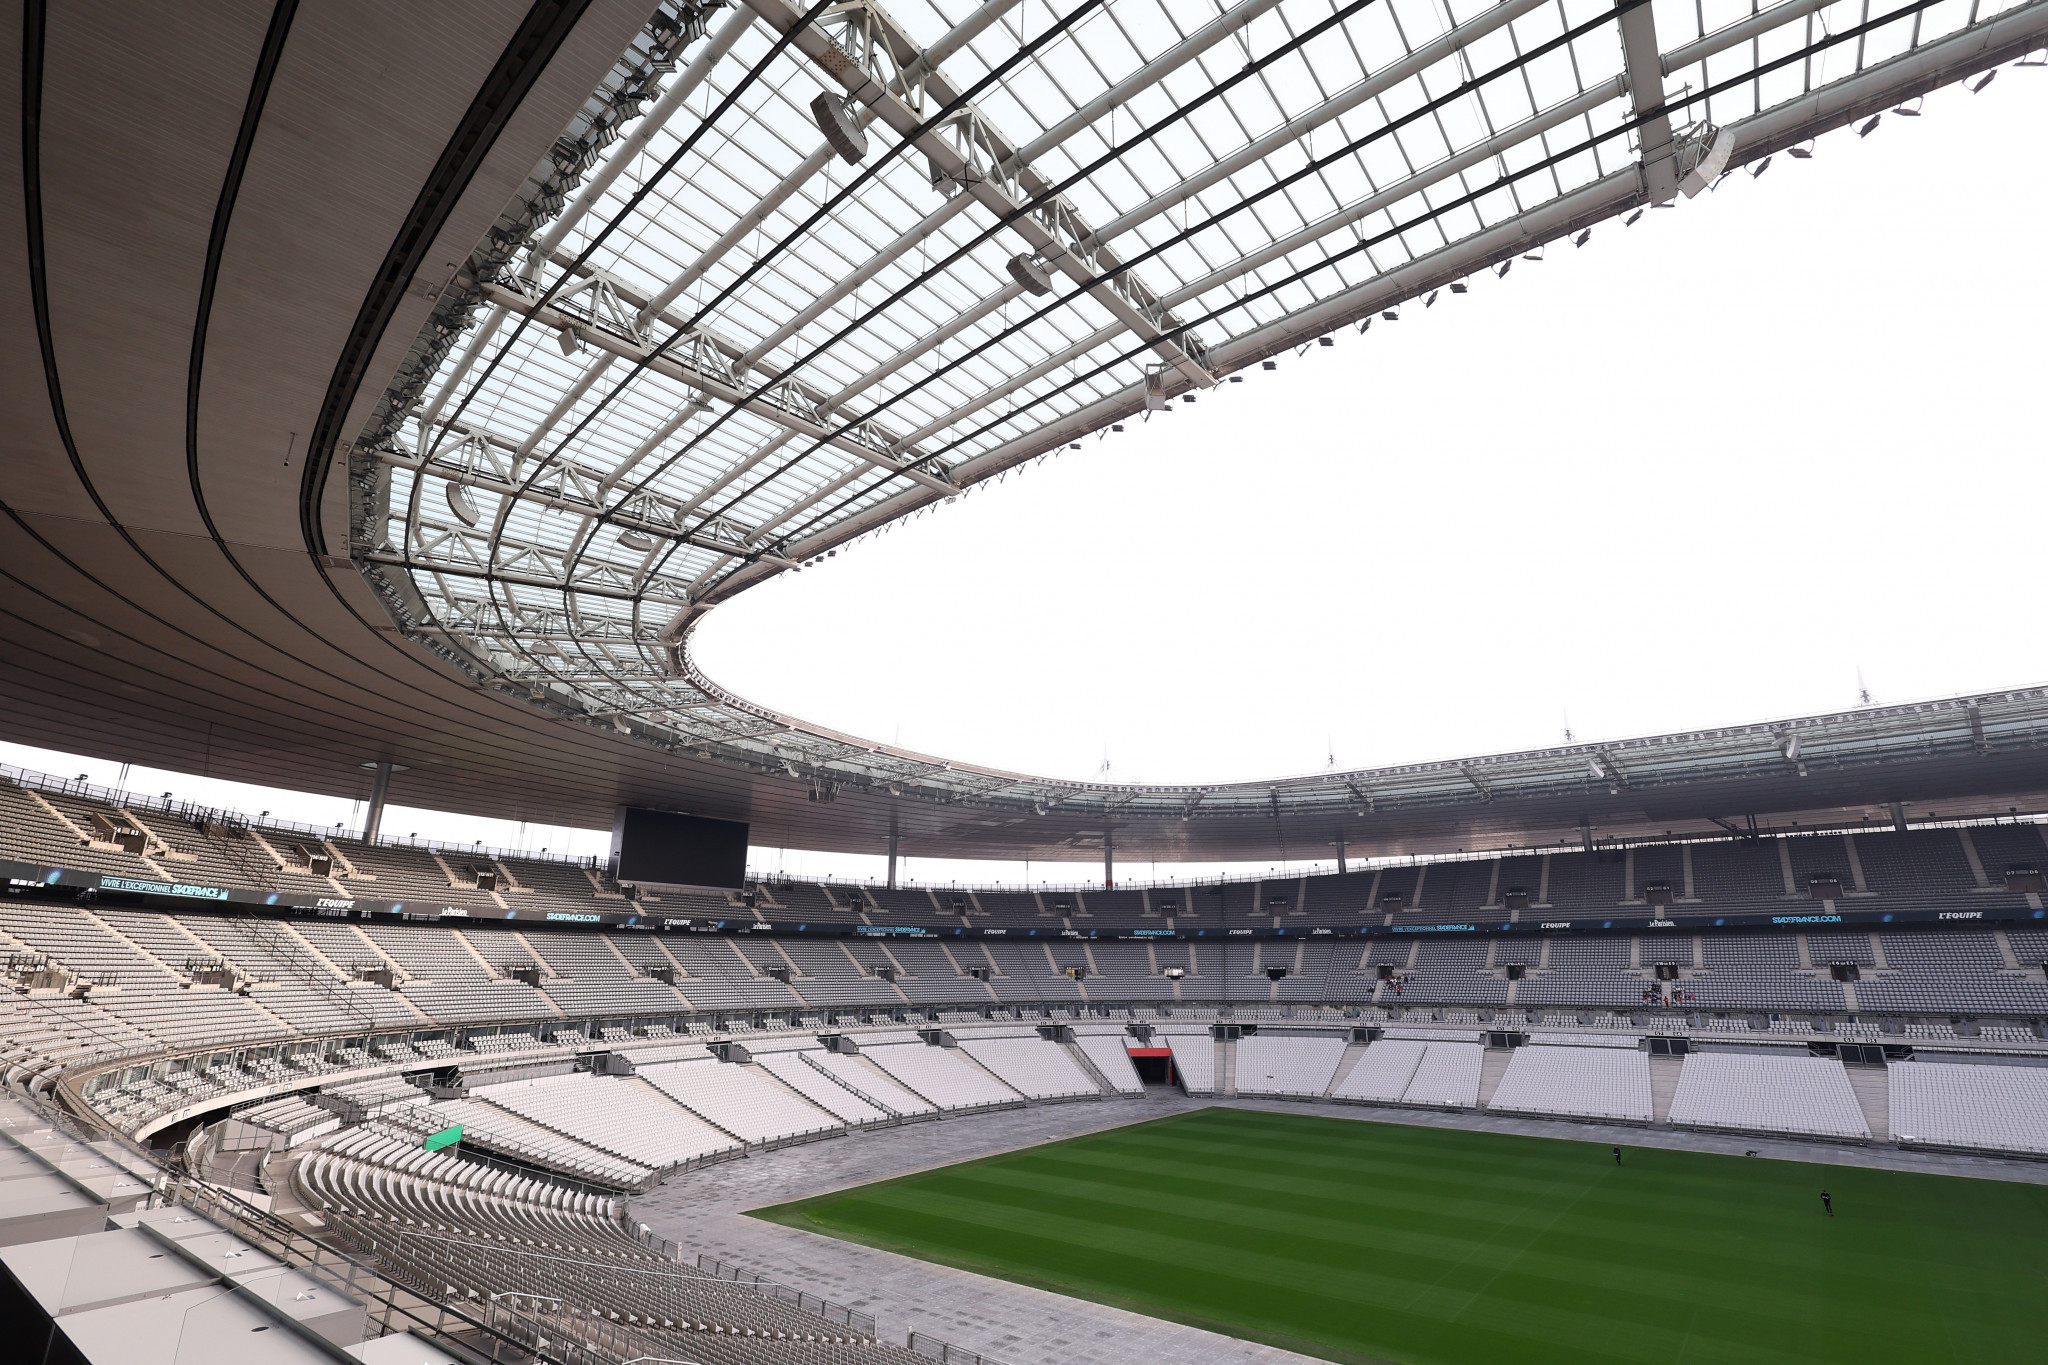 The Stade de France is set to be one of the key venues for Paris 2024 ©Getty Images